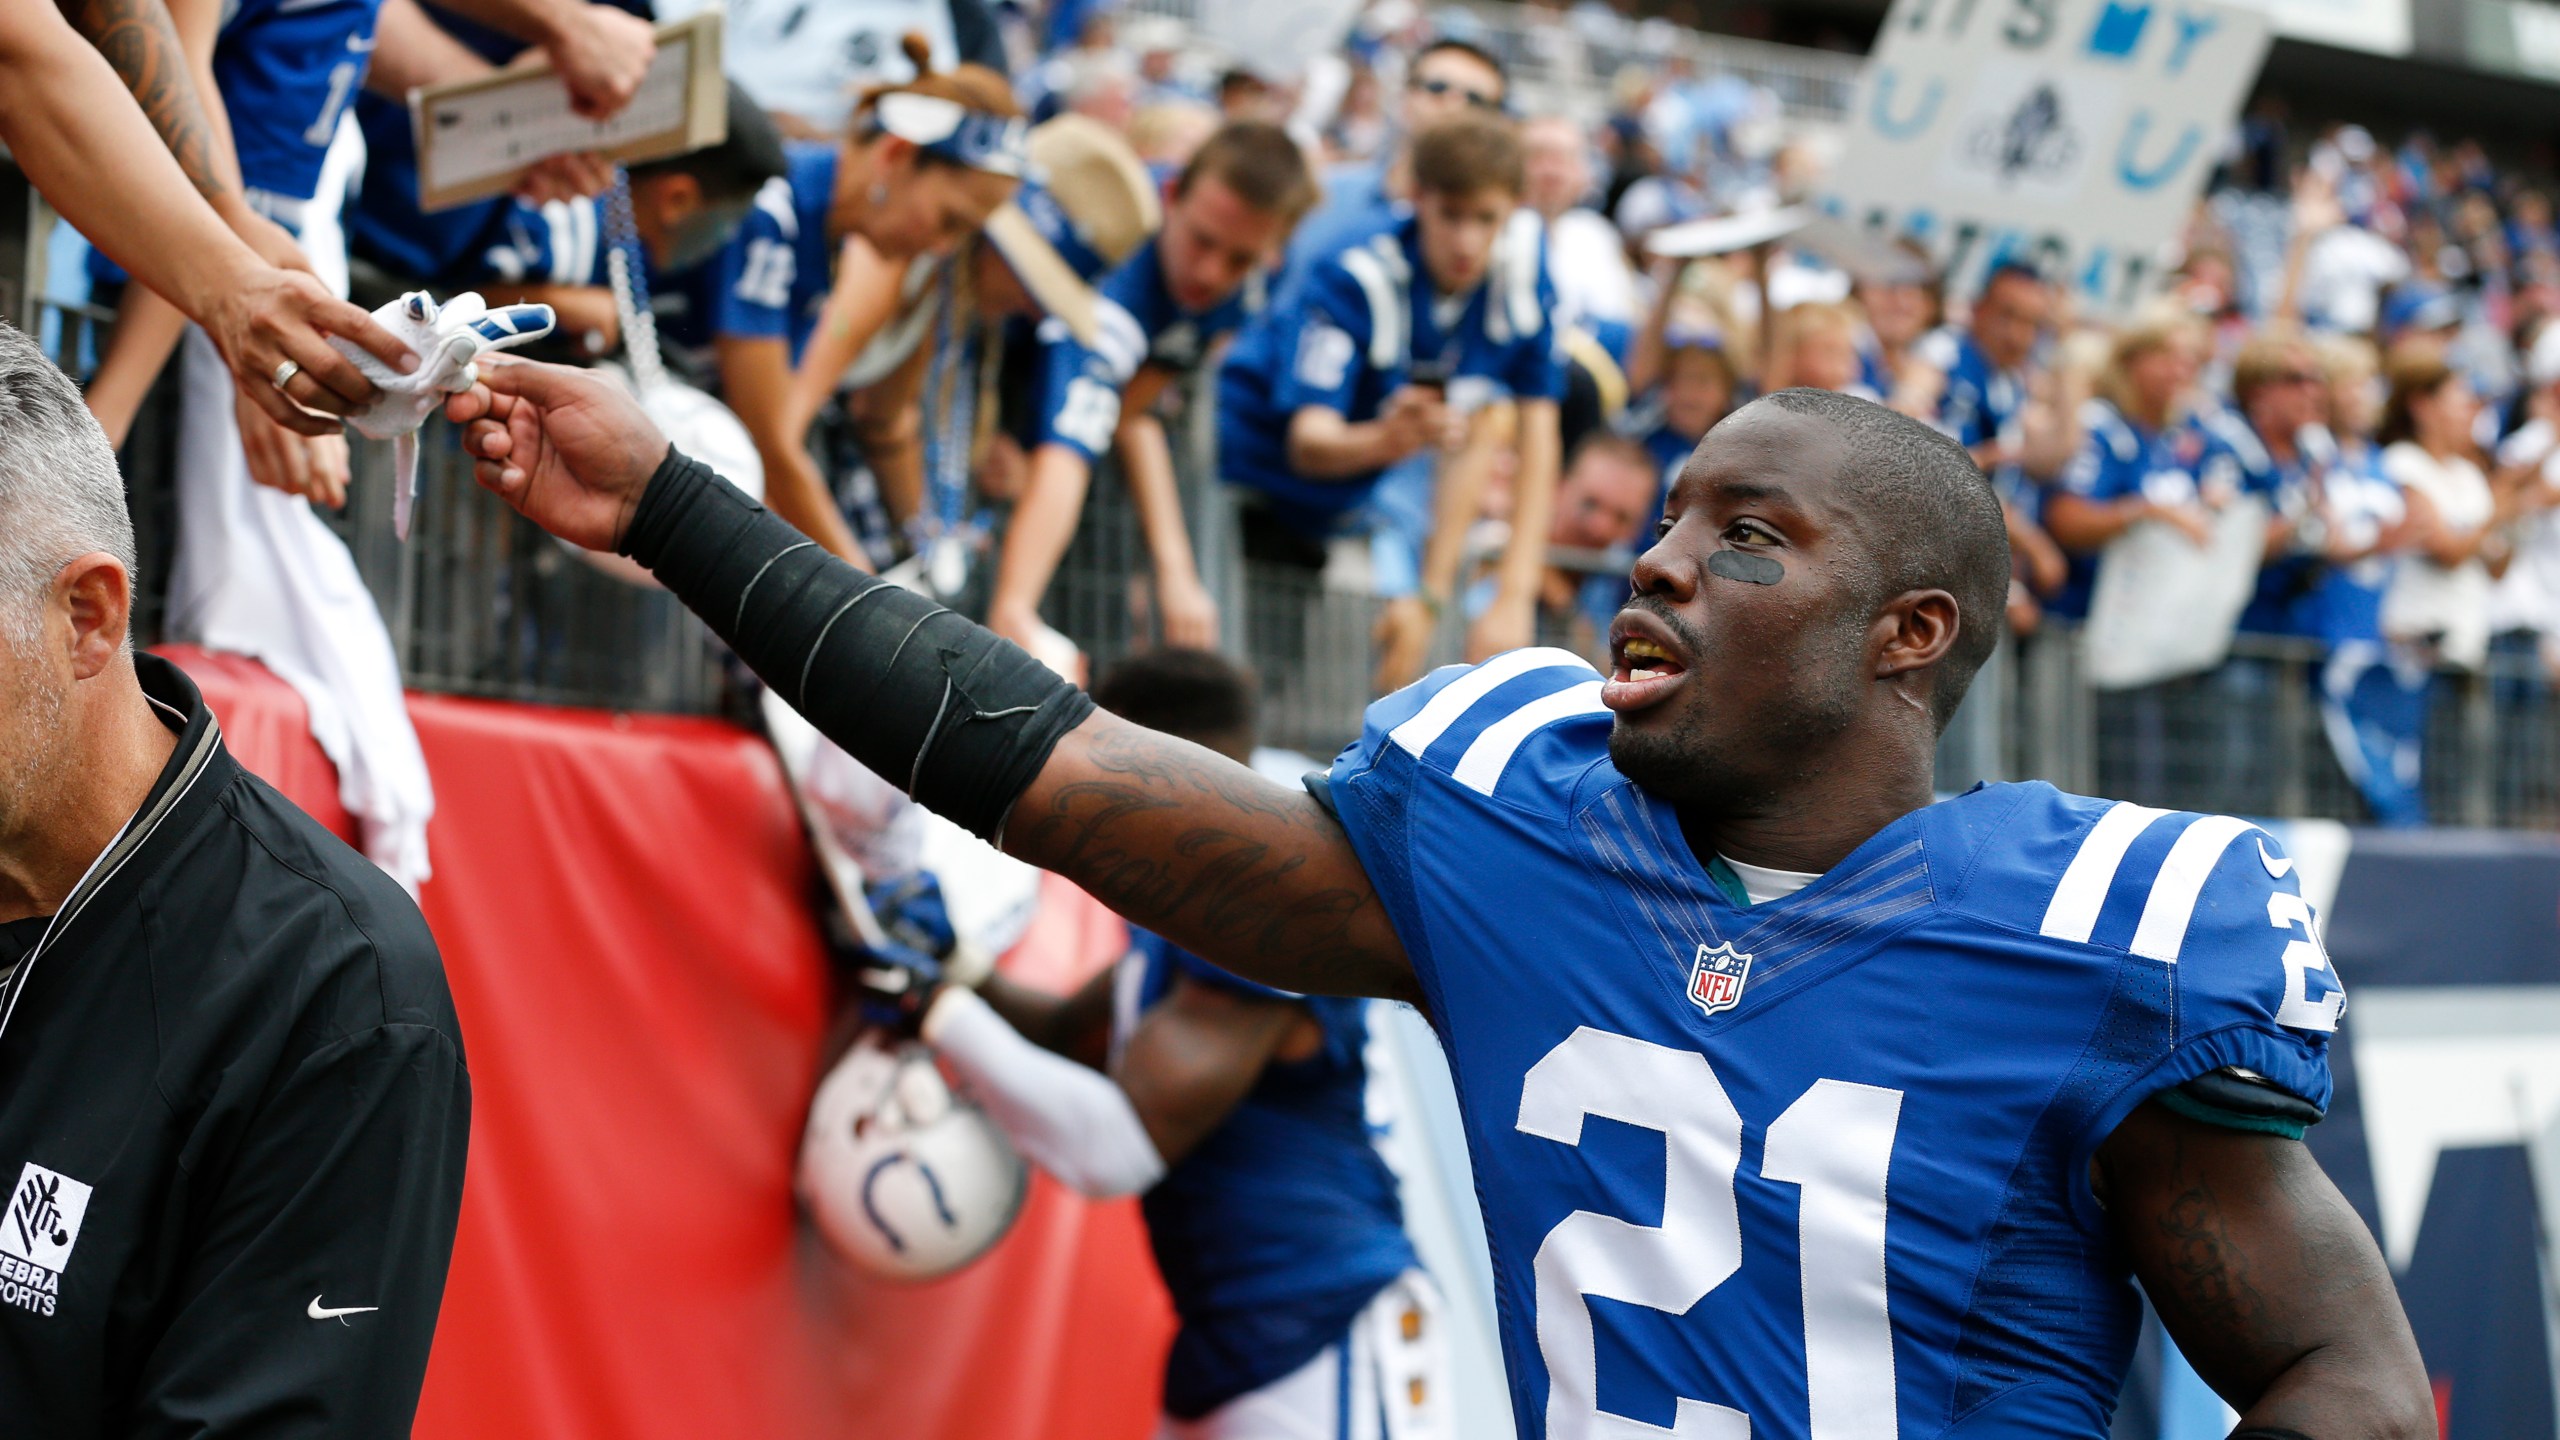 FILE - Indianapolis Colts cornerback Vontae Davis (21) gives his gloves to a fan after an NFL football game against the Tennessee Titans Sunday, Sept. 27, 2015, in Nashville, Tenn. The Colts won 35-33. Former Miami Dolphins and Indianapolis Colts cornerback Vontae Davis was found dead in his South Florida home on Monday, April 1, 2024, but police say no foul play is suspected.(AP Photo/Weston Kenney, File)